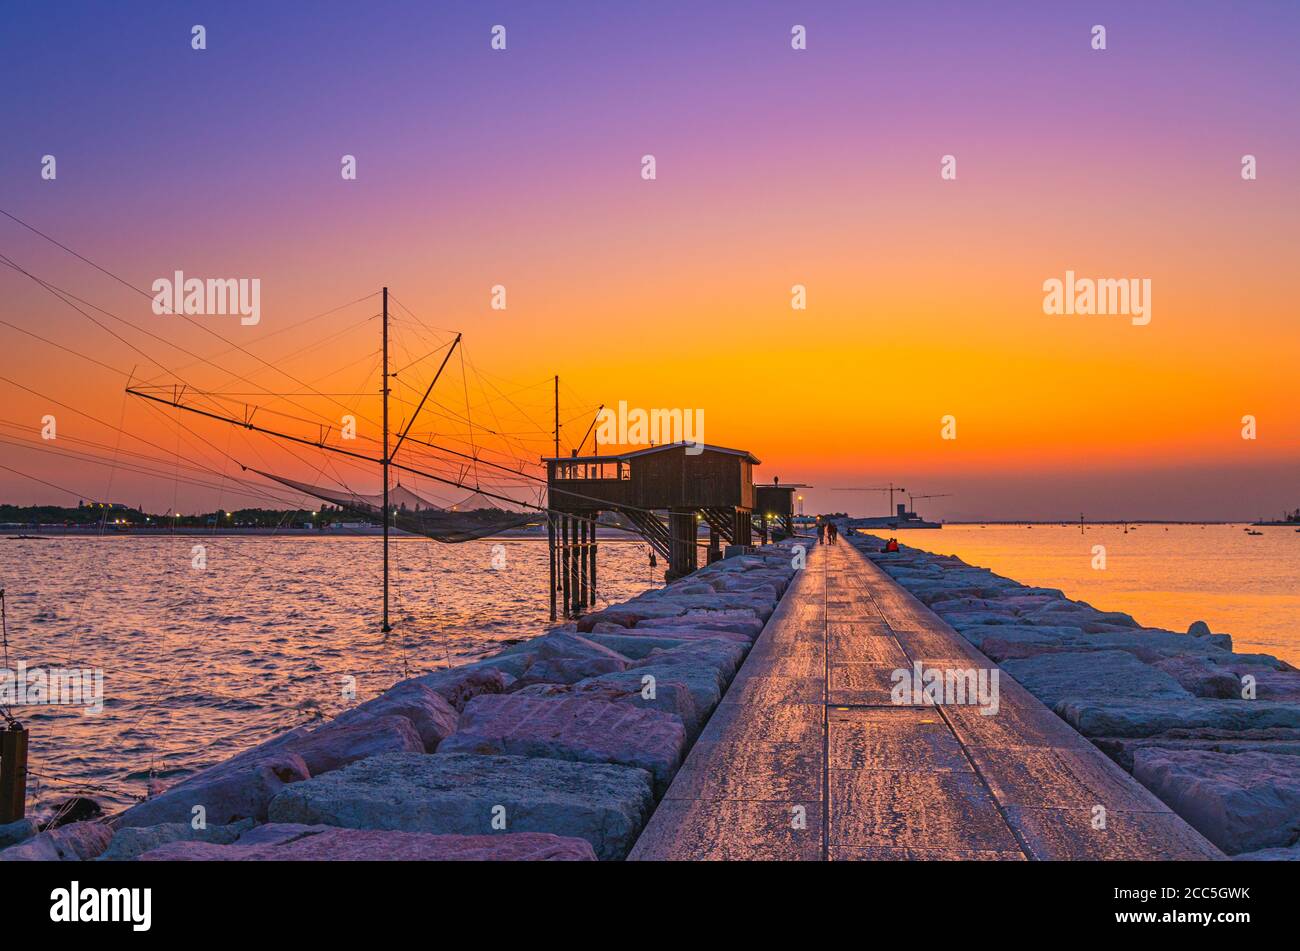 Traditional fishing station house with fishnet in water of Adriatic sea at pier Diga Sottomarina, skyline with beach, amazing yellow red sunset at twilight, dusk, evening view, Northern Italy Stock Photo